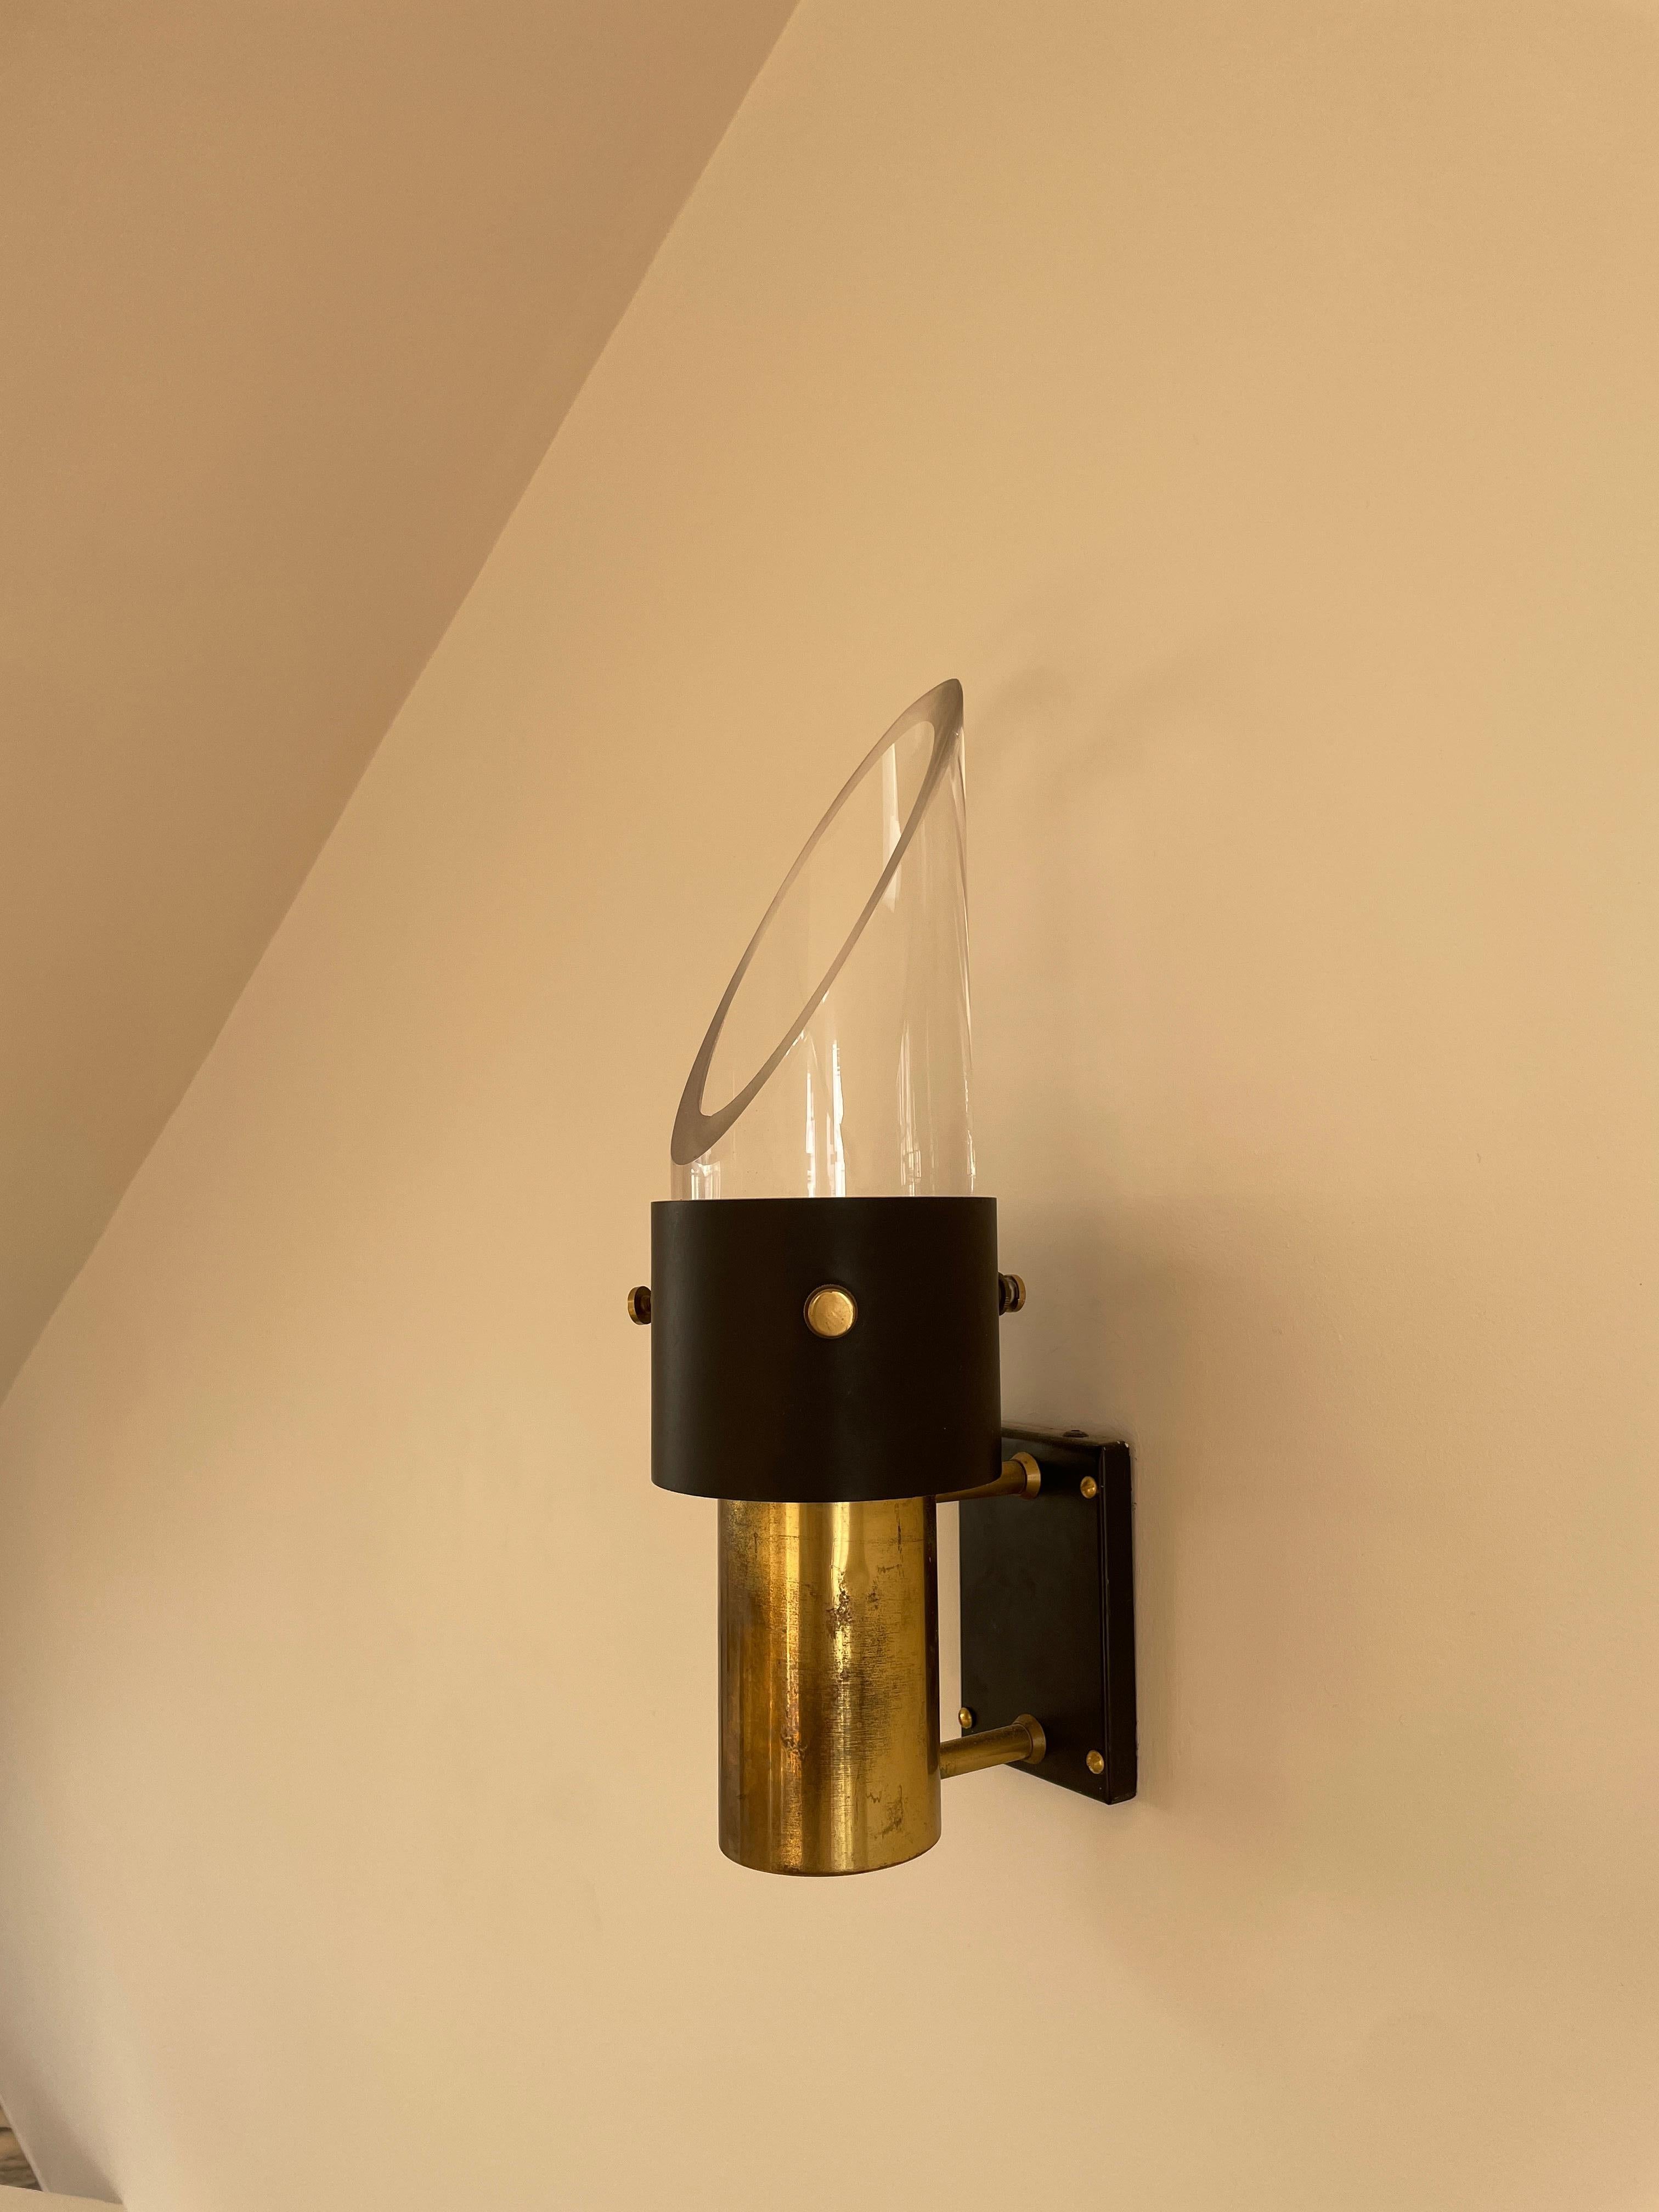 These beautiful wall lights provide slight directional lighting due to the slanted glass shade attached. Beautiful patina evident on the solid brass hardware. An incredibly striking lighting solution.